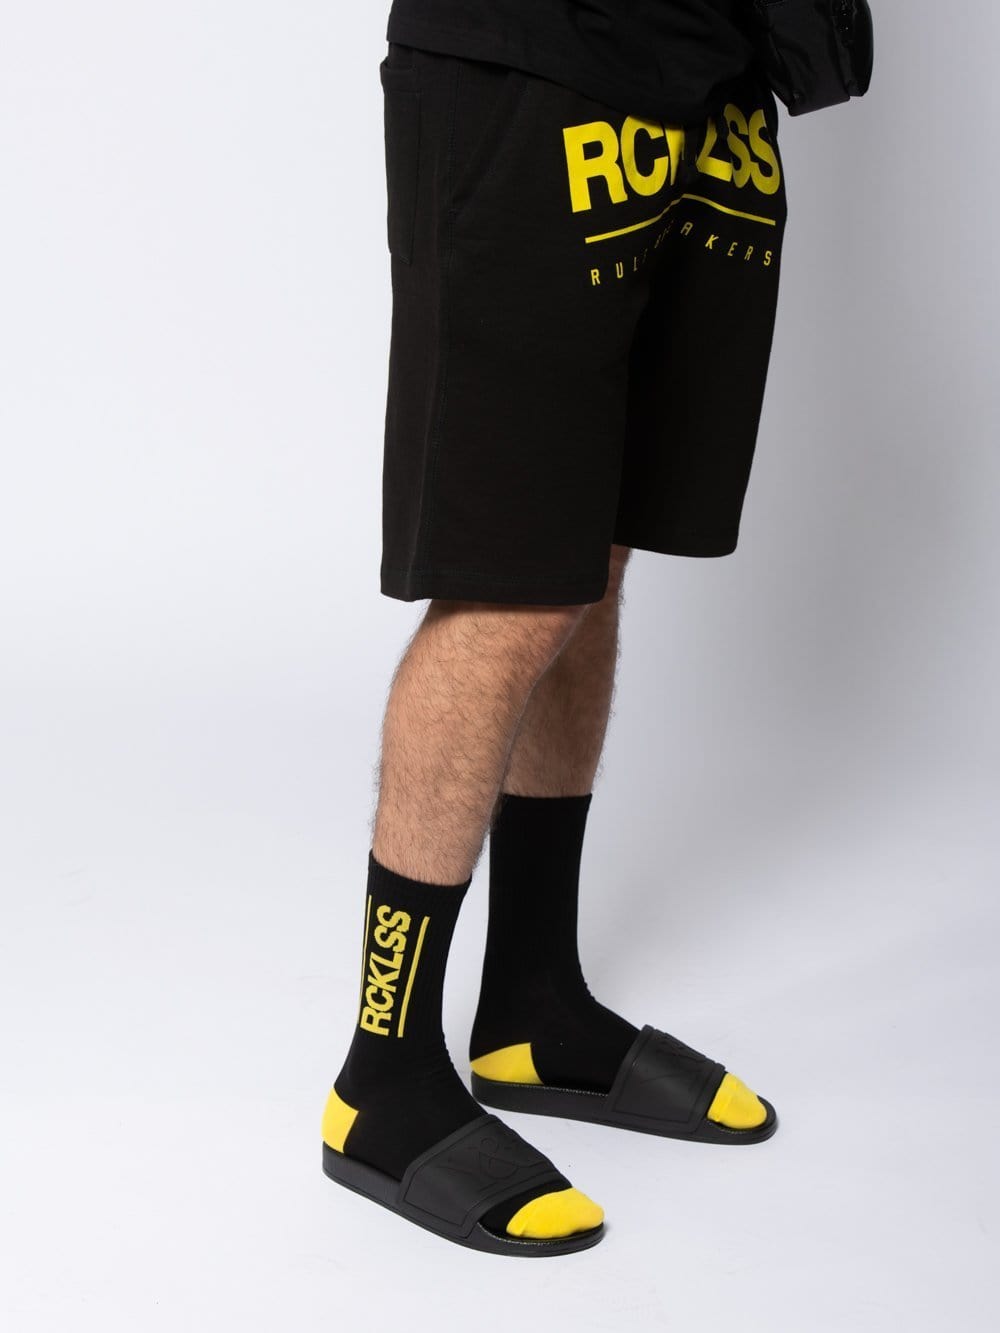 young-and-reckless-mens-accessories-socks-hardline-socks-black-yellow-os-black-yellow-7010052571239_2000x.jpg